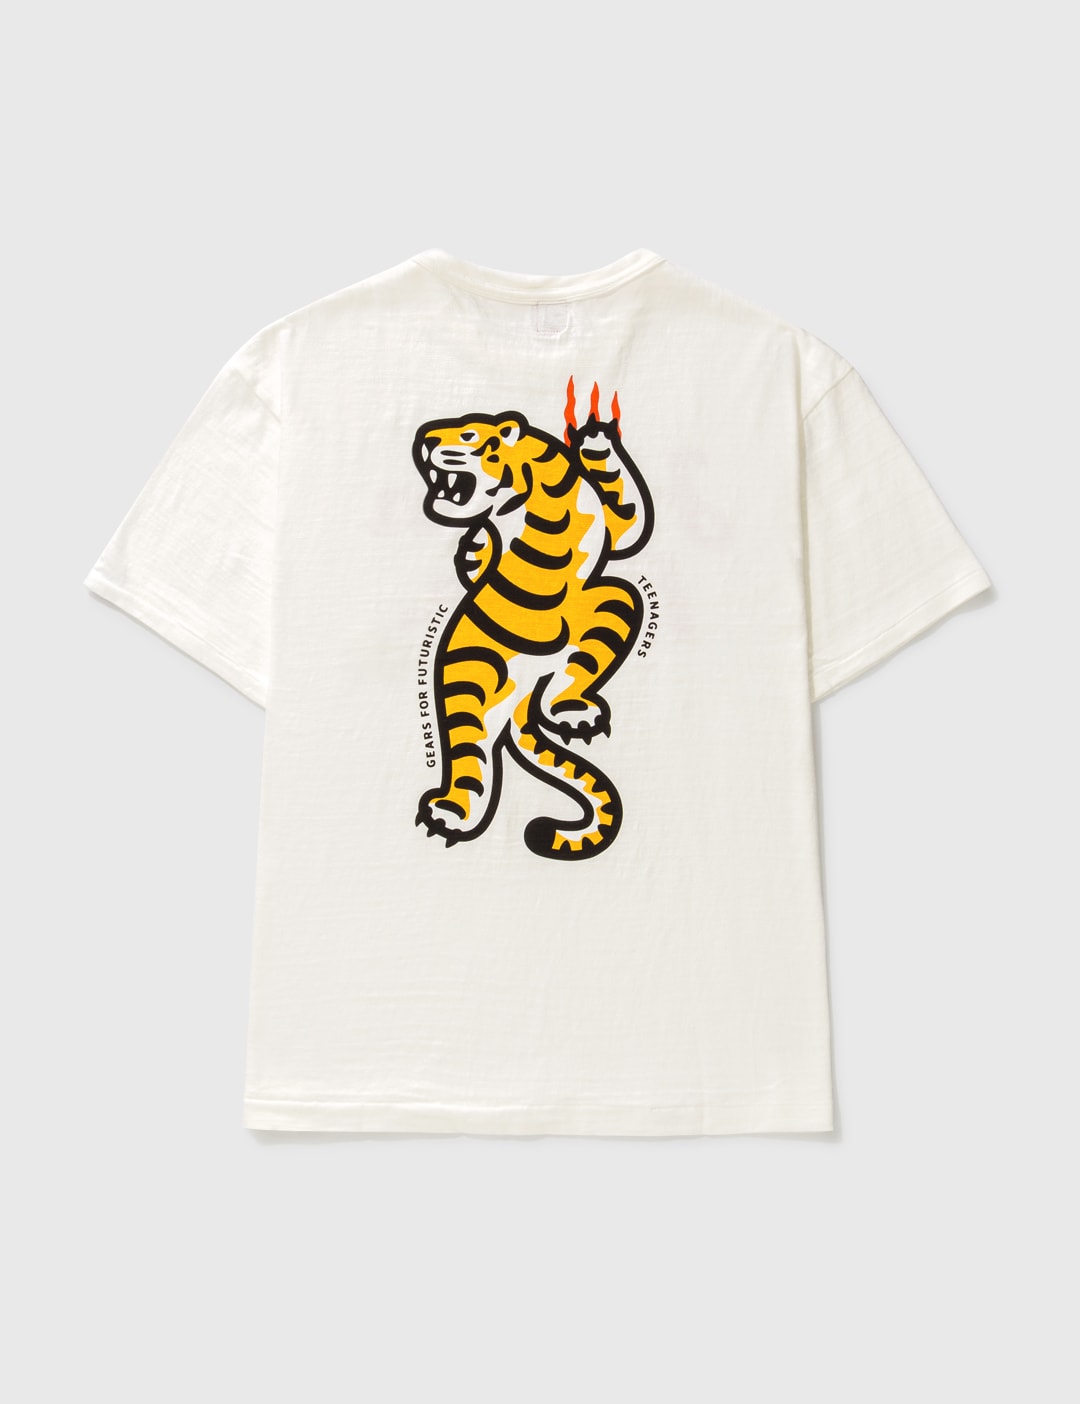 Graphic T-shirt #11 Placeholder Image